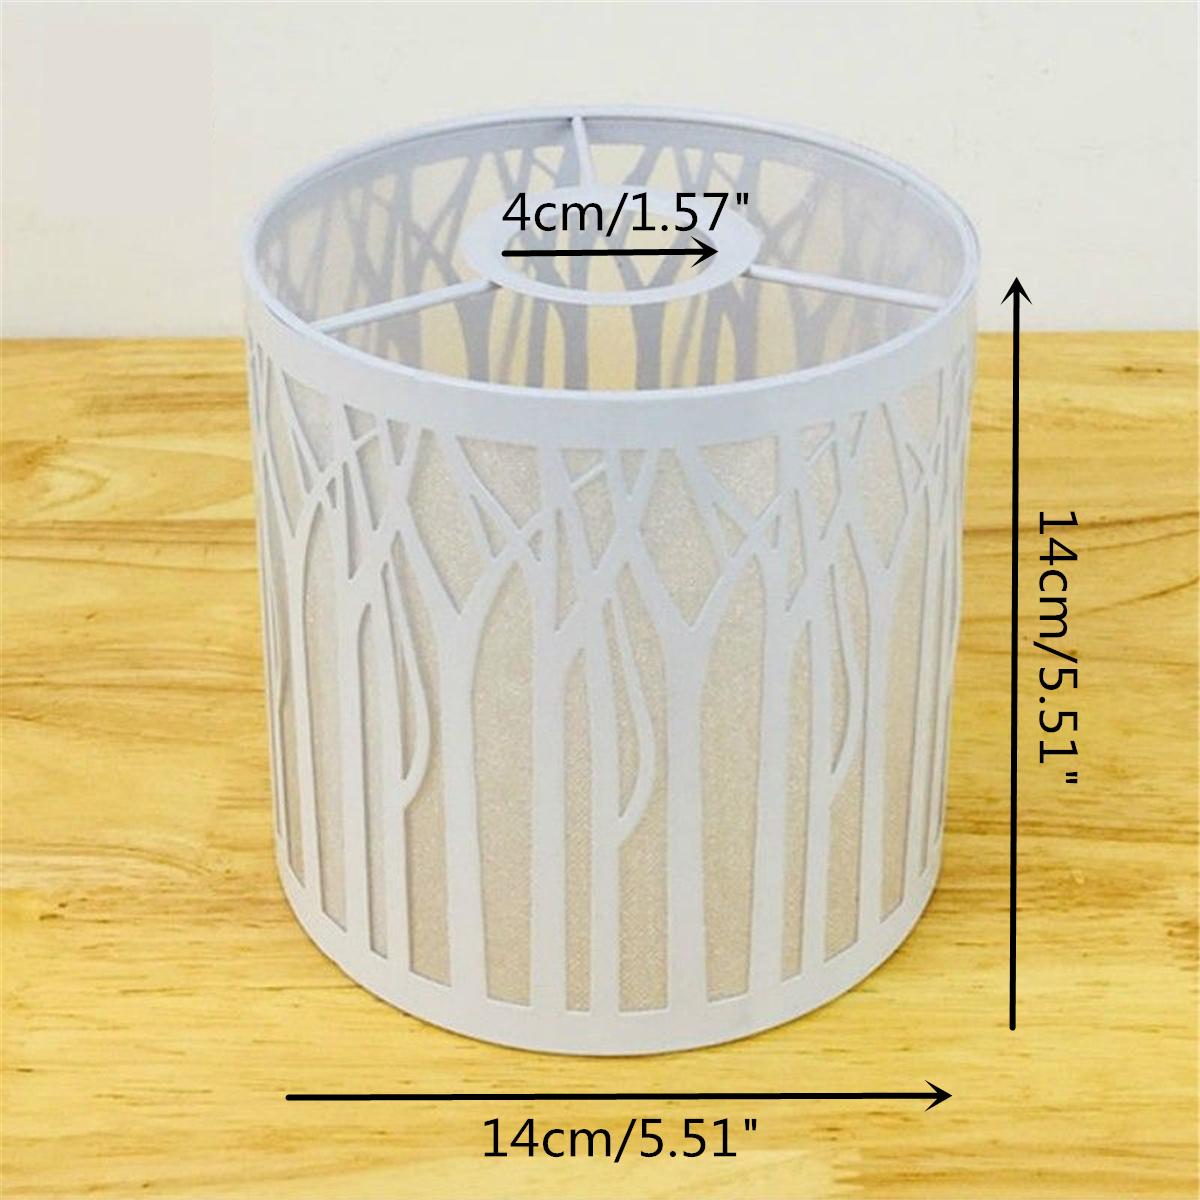 Metal Lampshade Forest Water Cube Design Lamp Cover Table Ceiling Pendant Light Shade Lighting Accessories Decoration 2 Styles